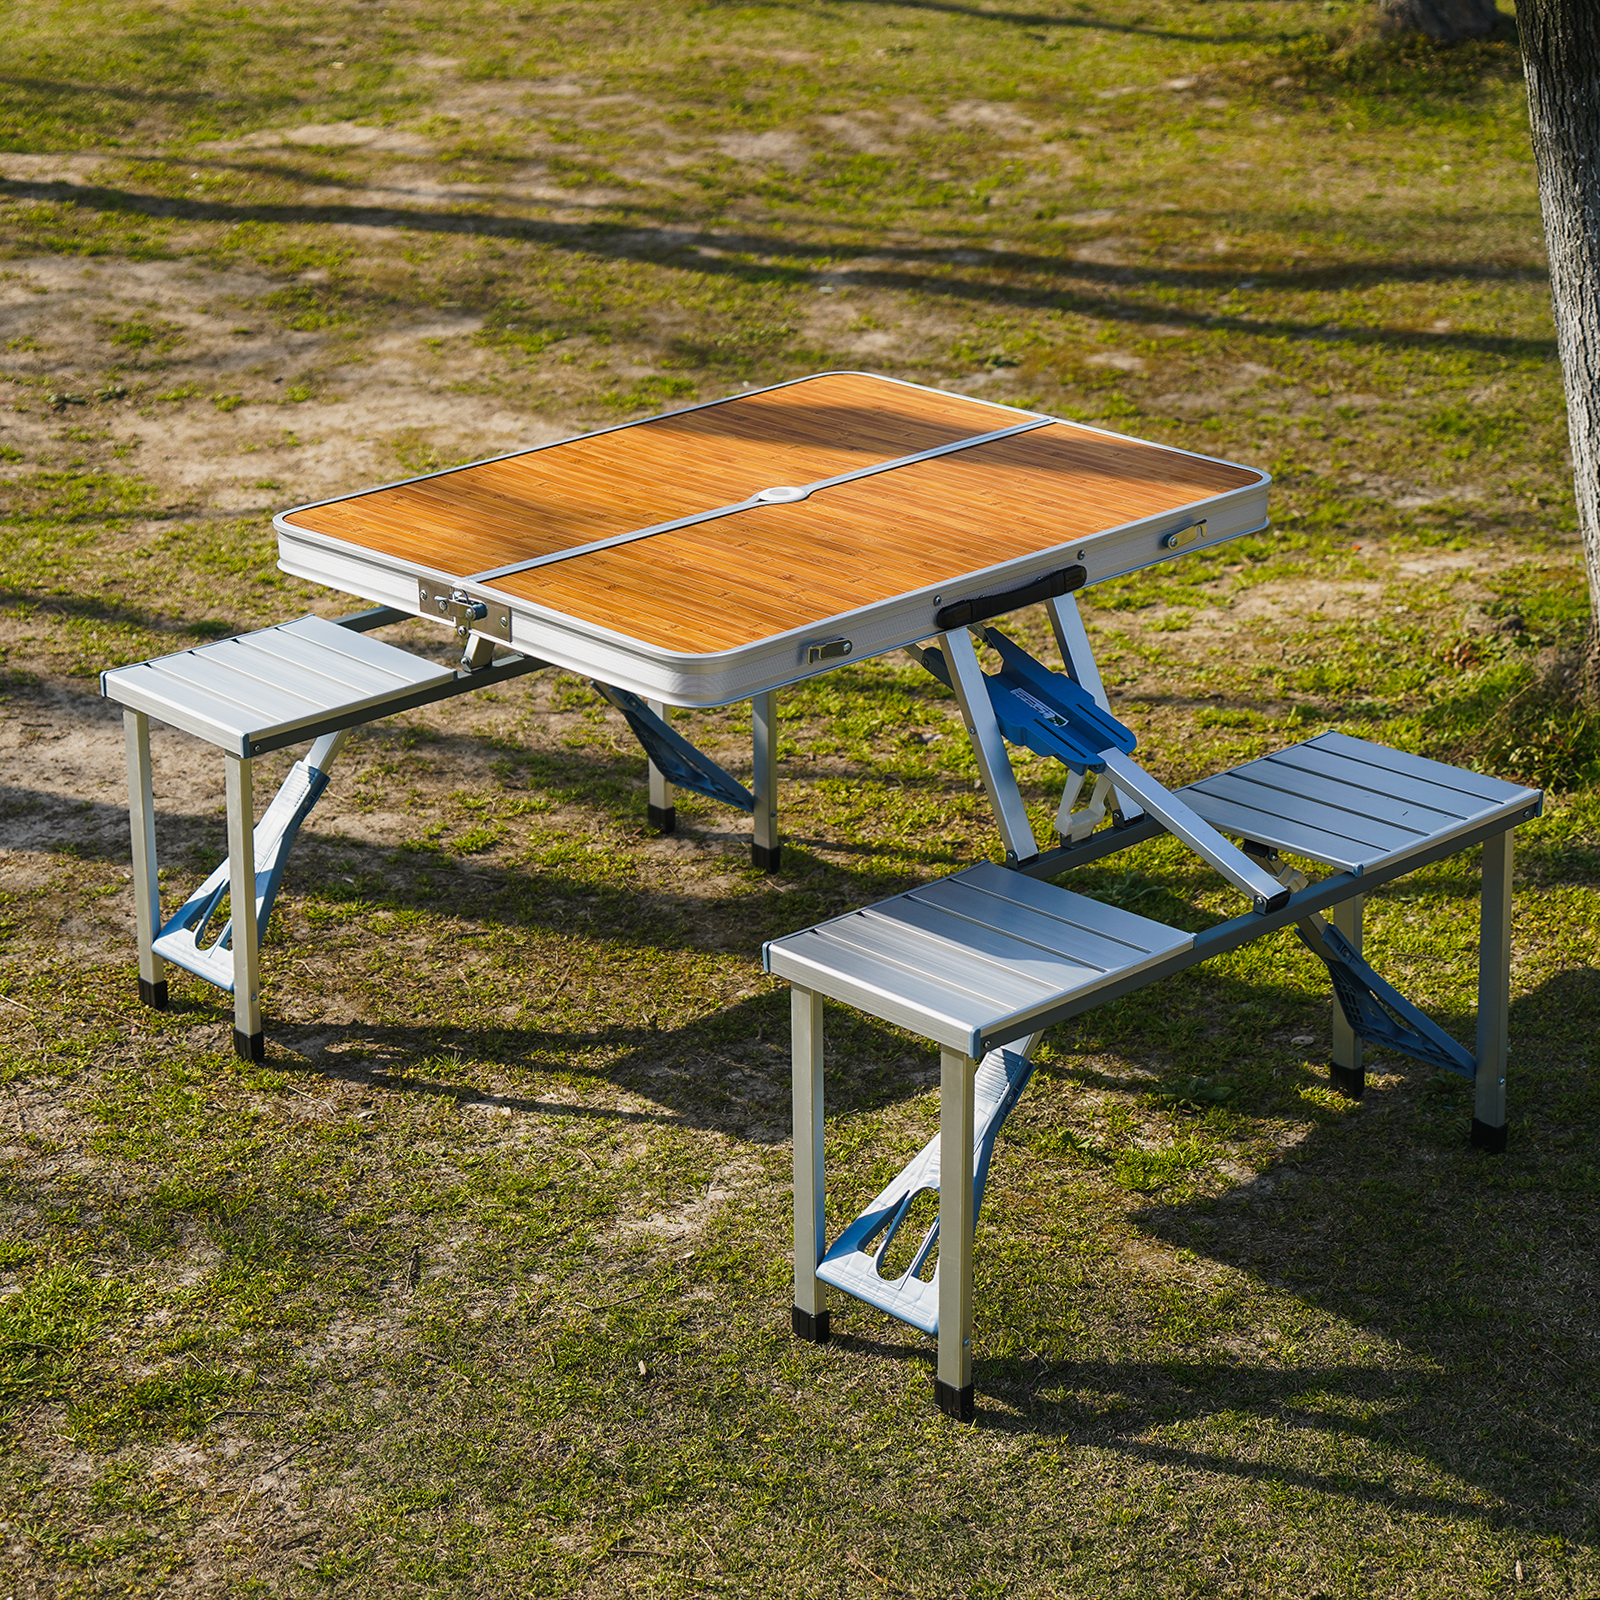 EURO SAKURA Folding Picnic Table Beach Set with Seats Chairs and Umbrella Hole Portable Camping Picnic Tables with Wooden - image 1 of 11